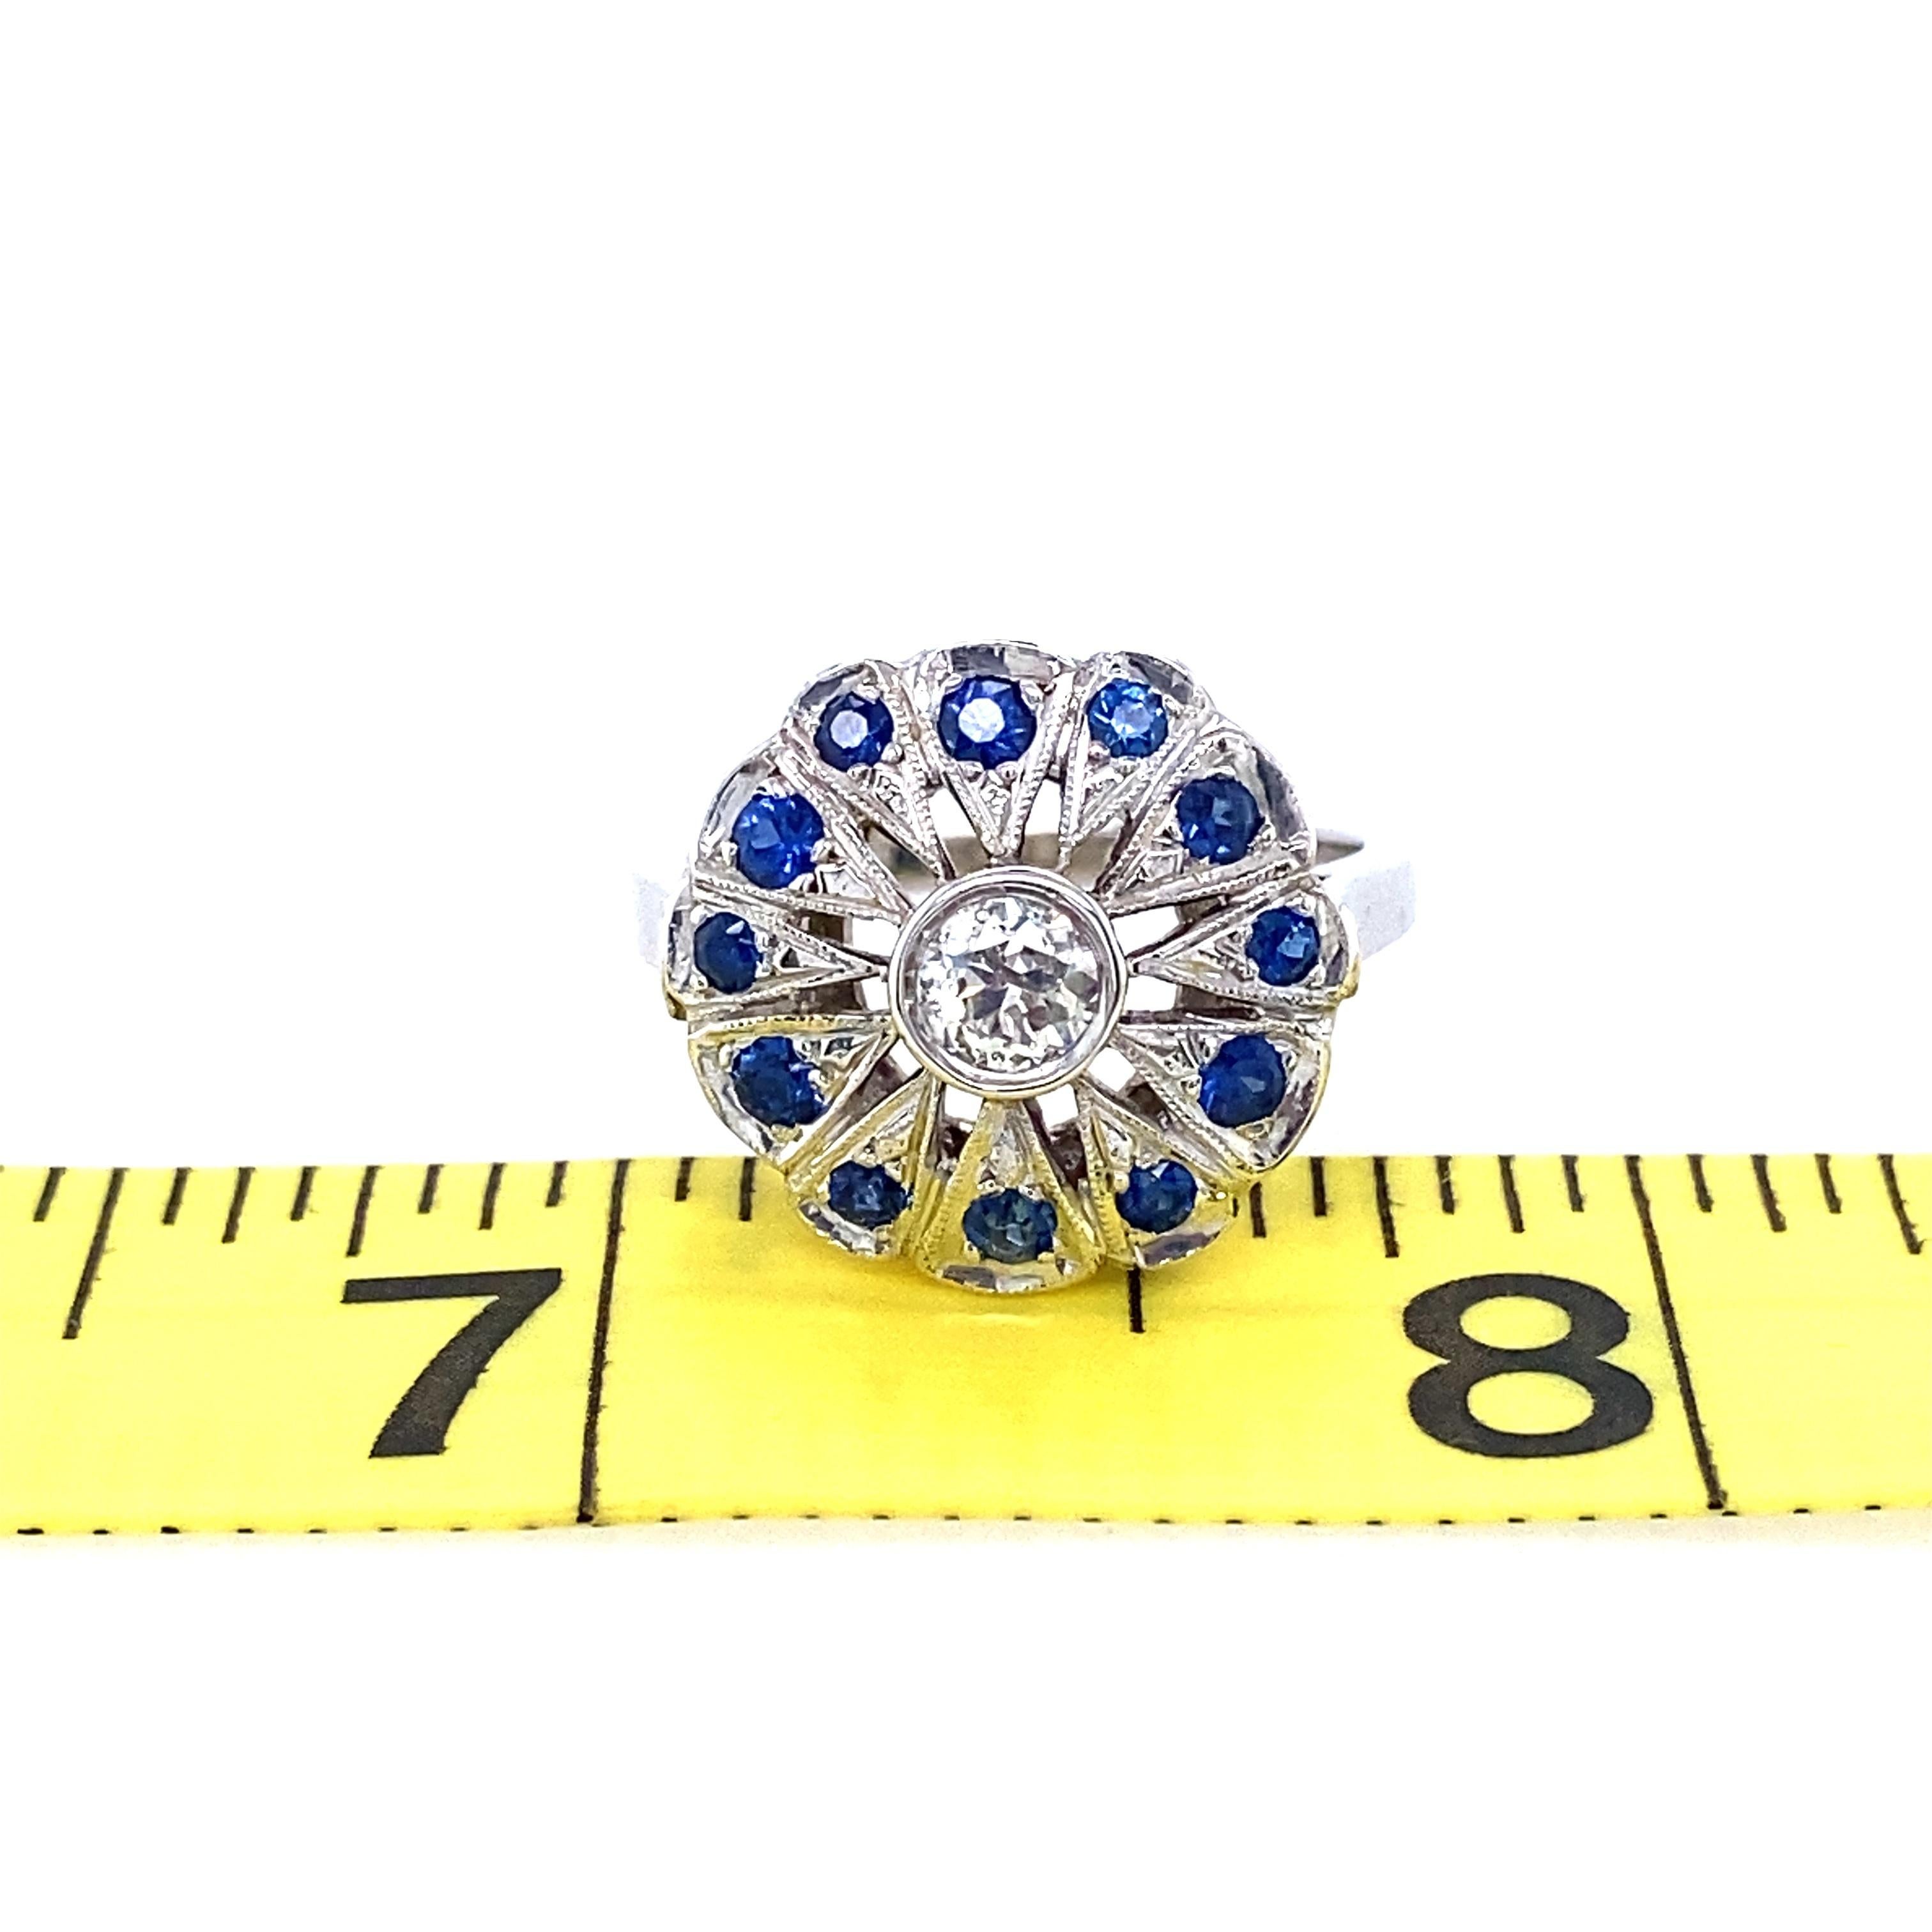 14K White Gold 1950s Old European Cut Diamond and Synthetic Sapphire Ring 1